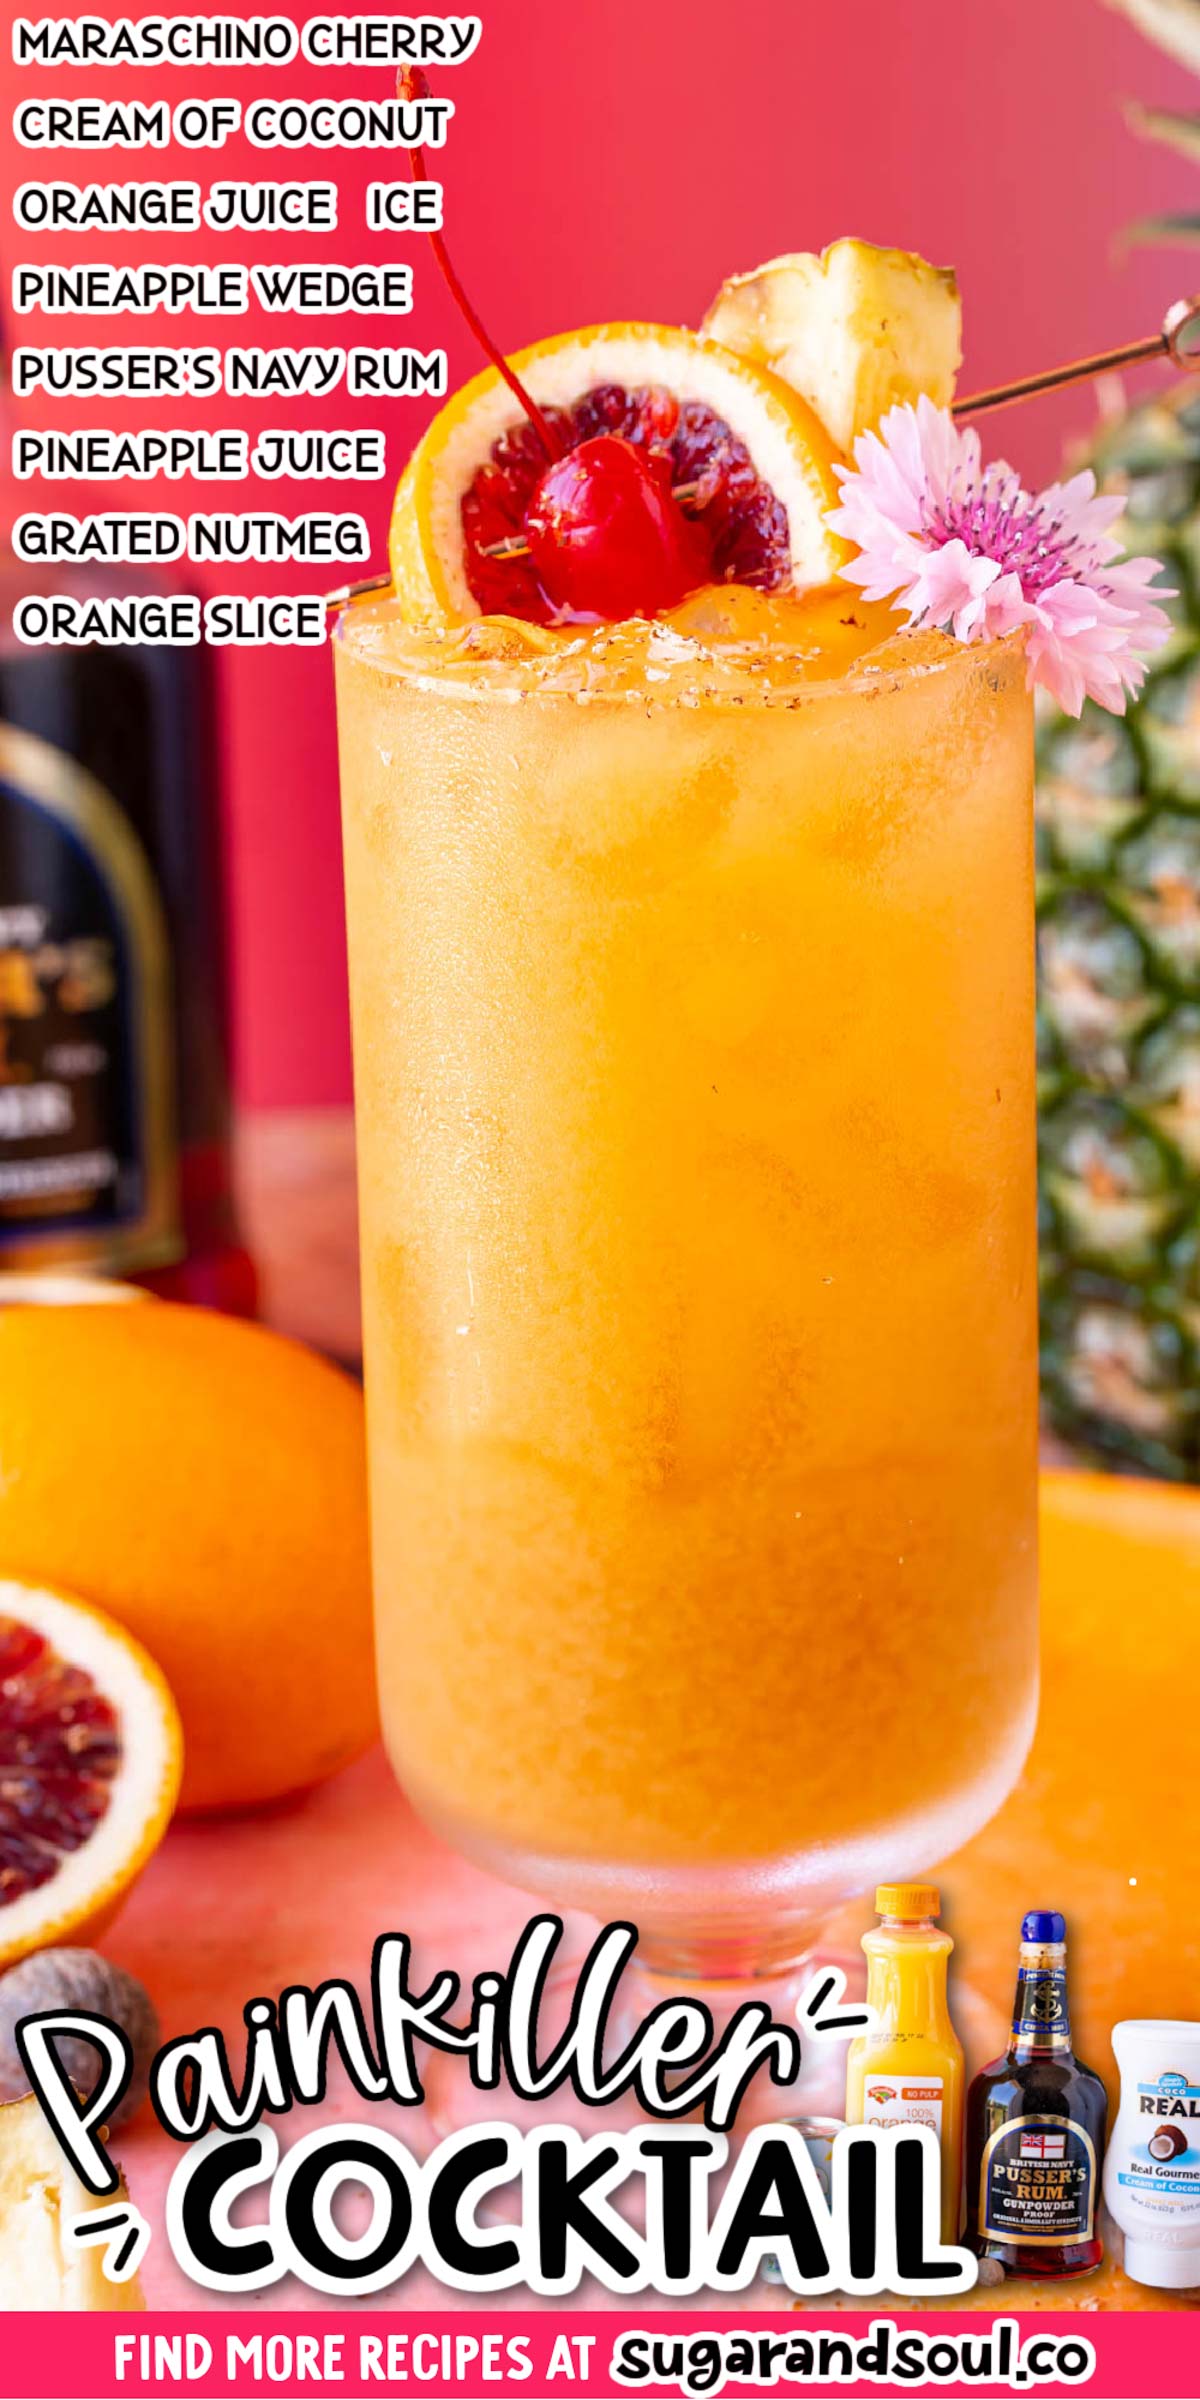 This Painkiller Cocktail is made with pineapple juice, orange juice, cream of coconut, and aged rum in just 3 minutes! A fruity, tropical drink that you'll want in your hand all summer long! via @sugarandsoulco